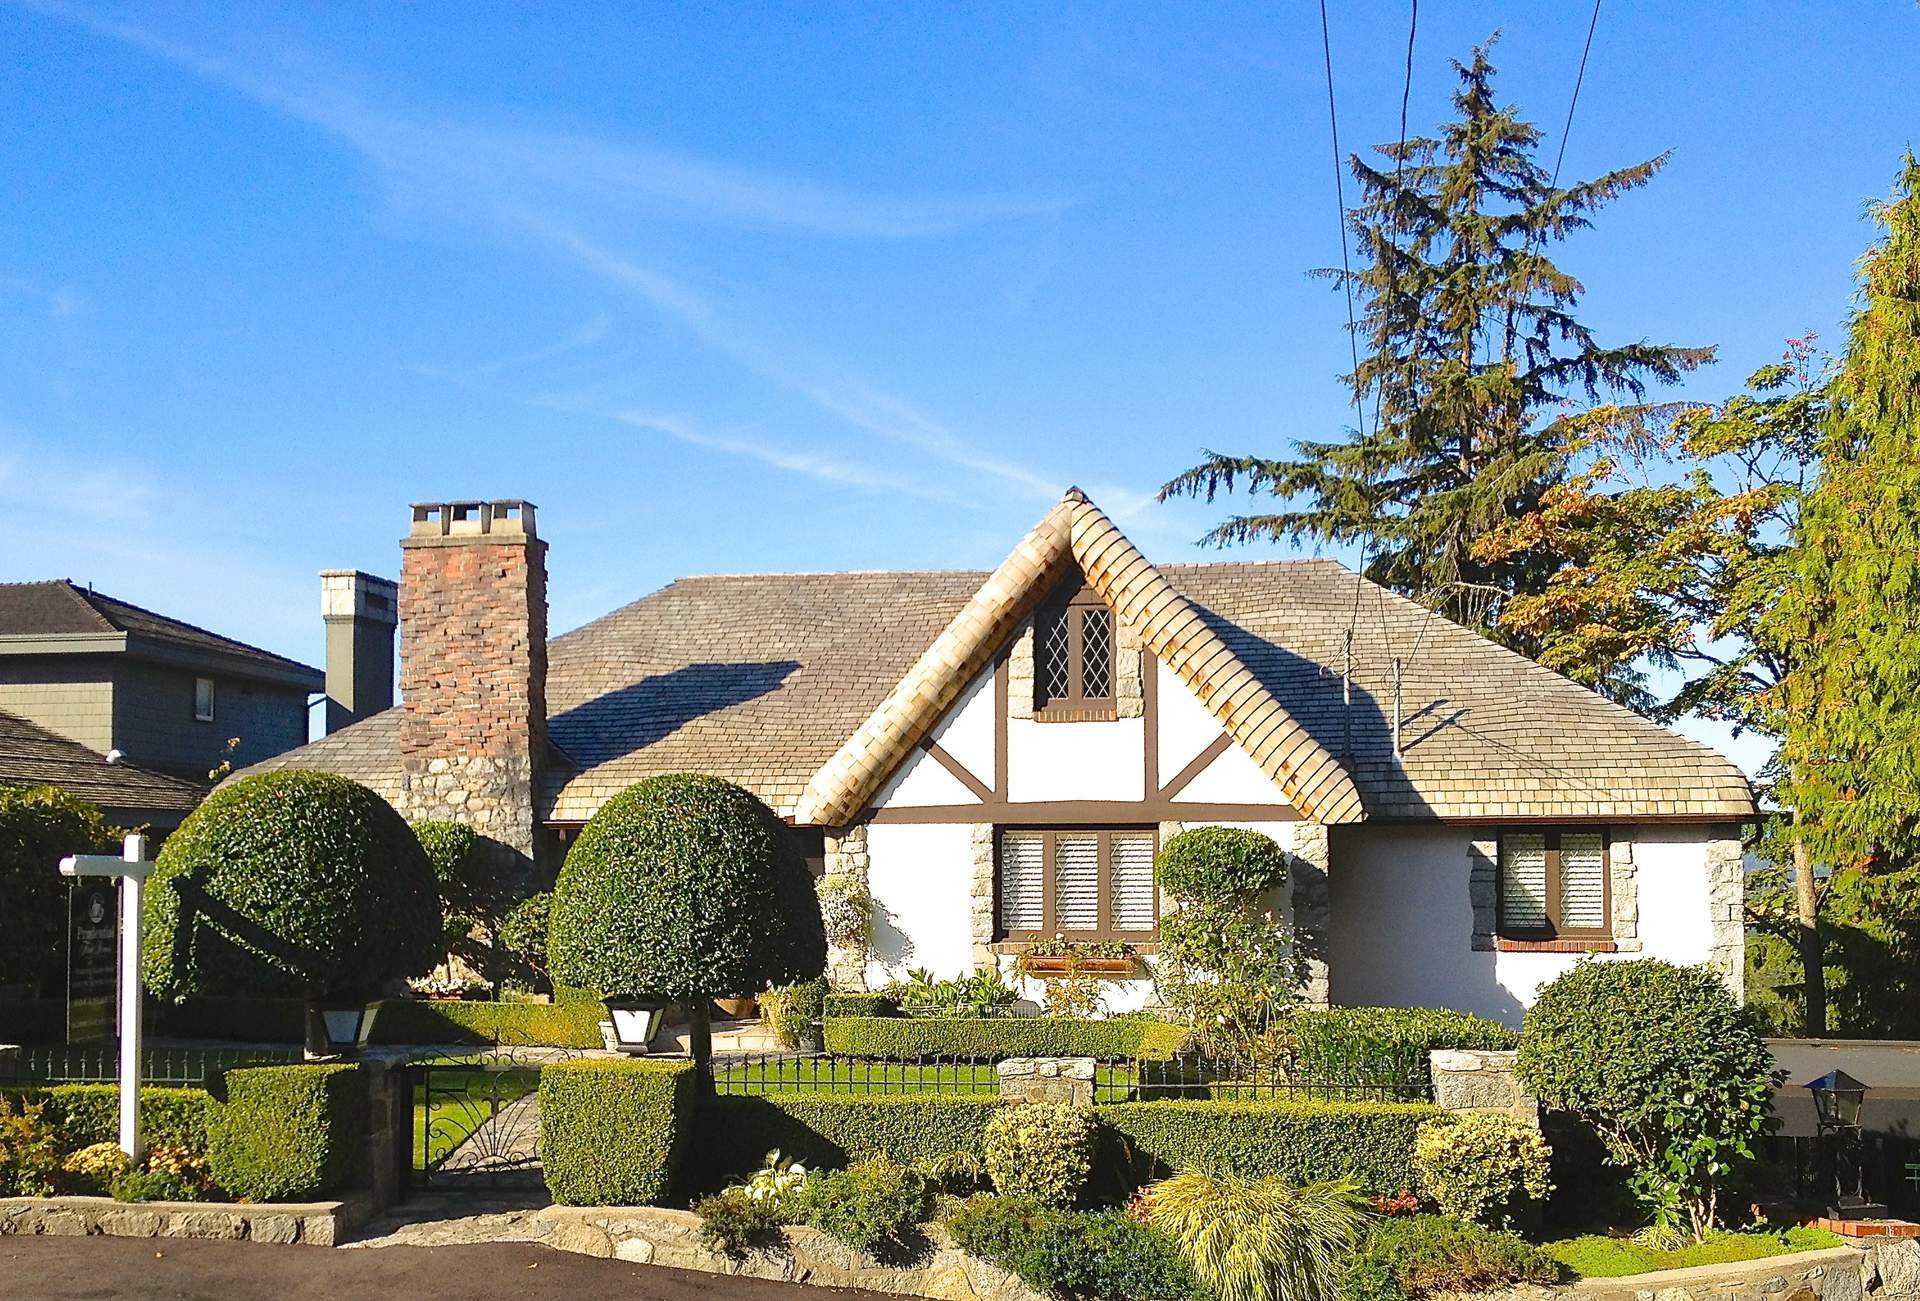 West Vancouver's 'Cotswold' Style with Stunning Ocean Views!